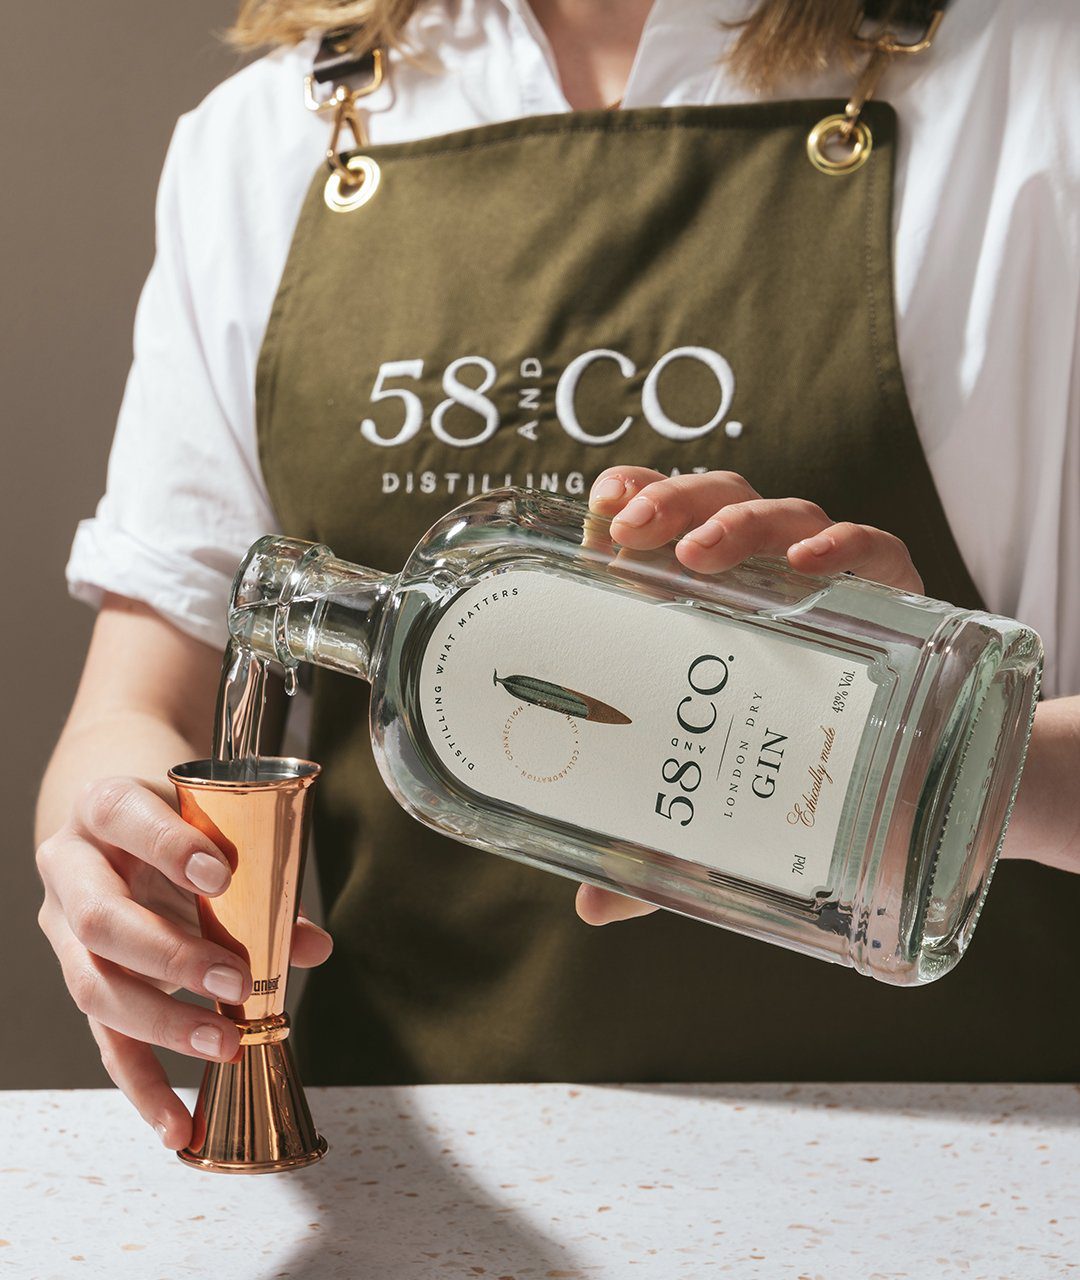 58 and Co Gin Being Poured Rebrand by Kingdom and Sparrow